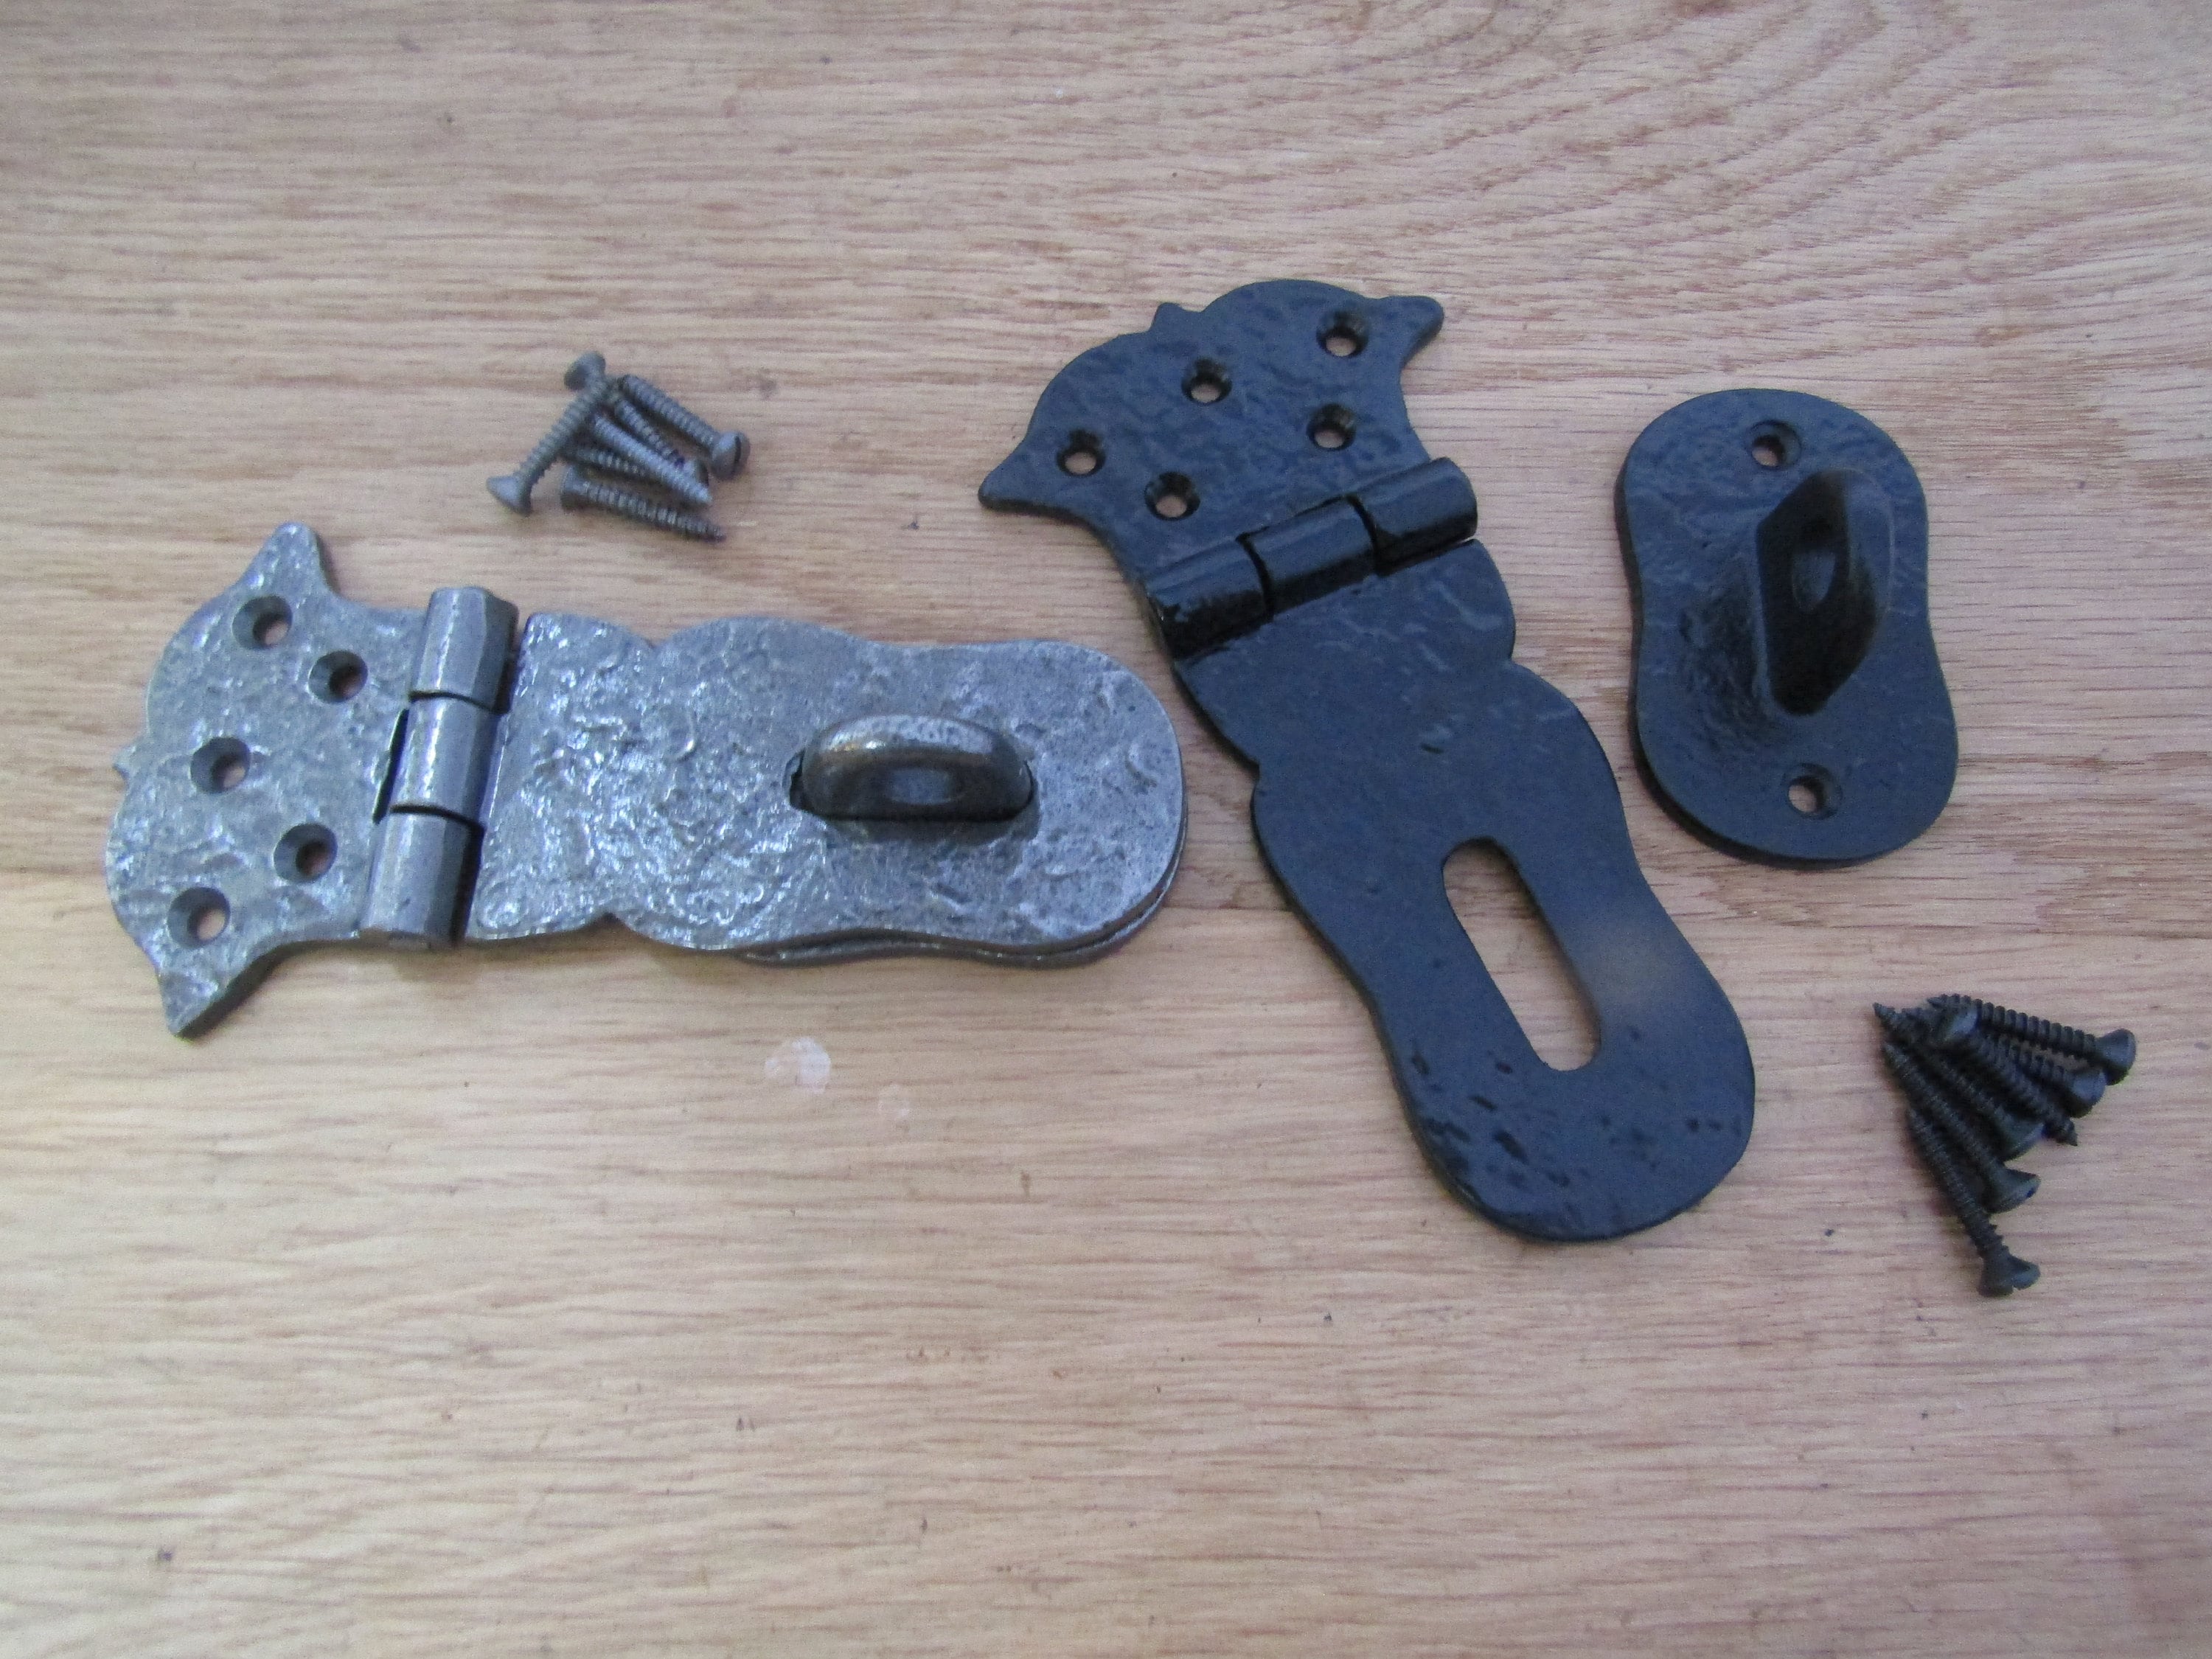 Decorative Safety Hasp and Staple Door Latch Lock For Blanket Box Chest etc 